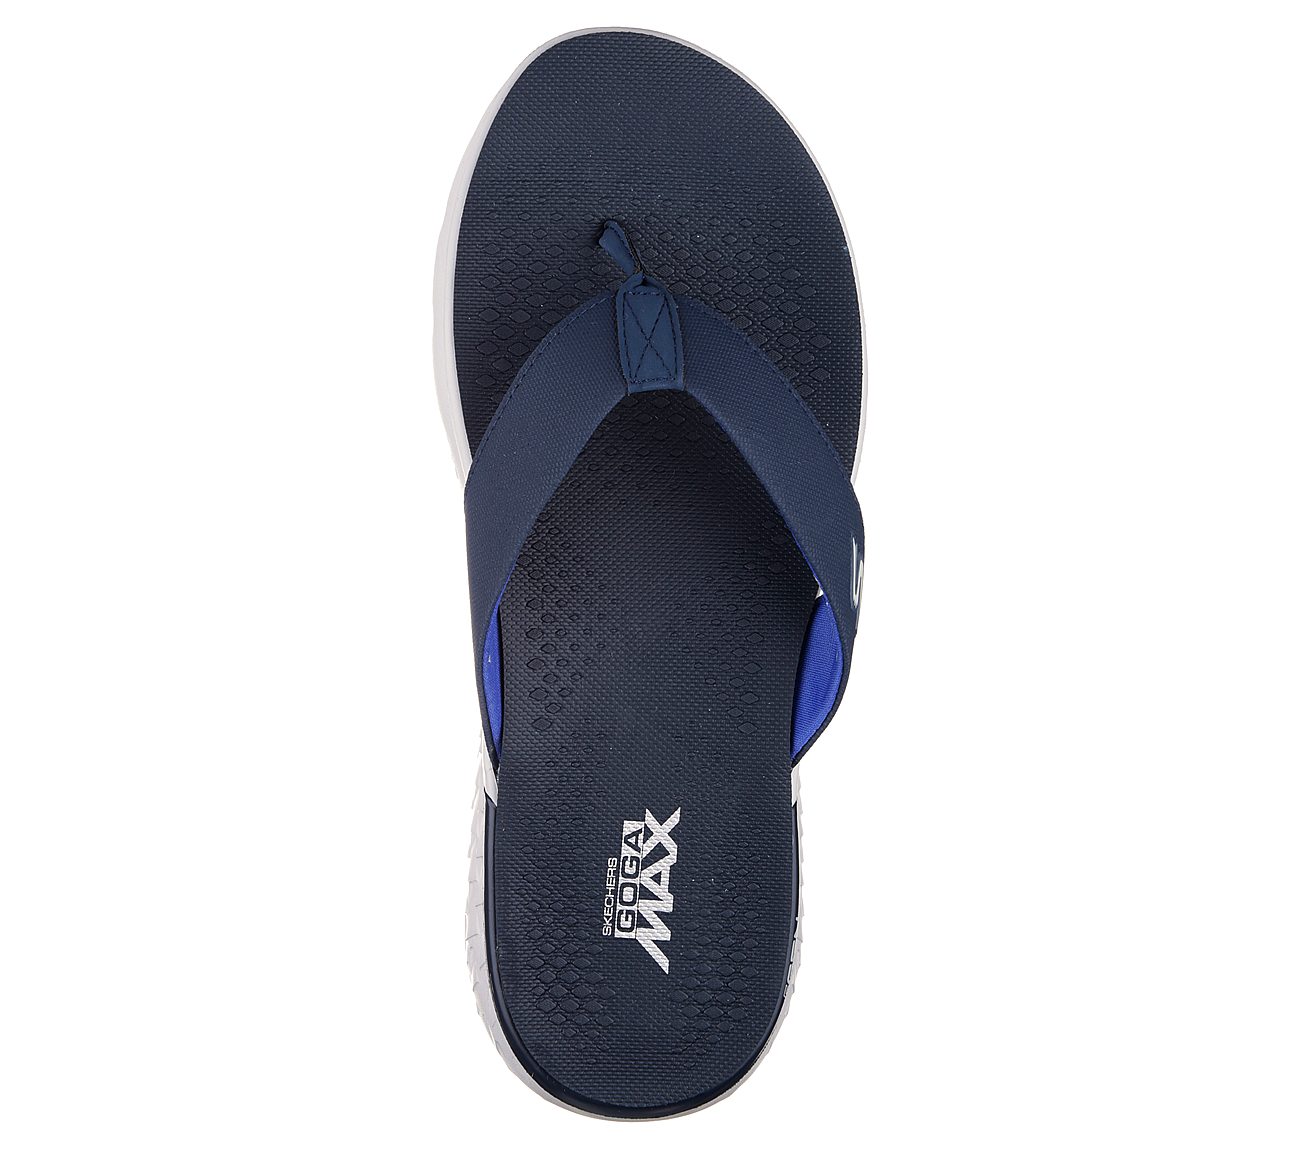 ON-THE-GO 400 - SHORE, NAVY/BLUE Footwear Top View